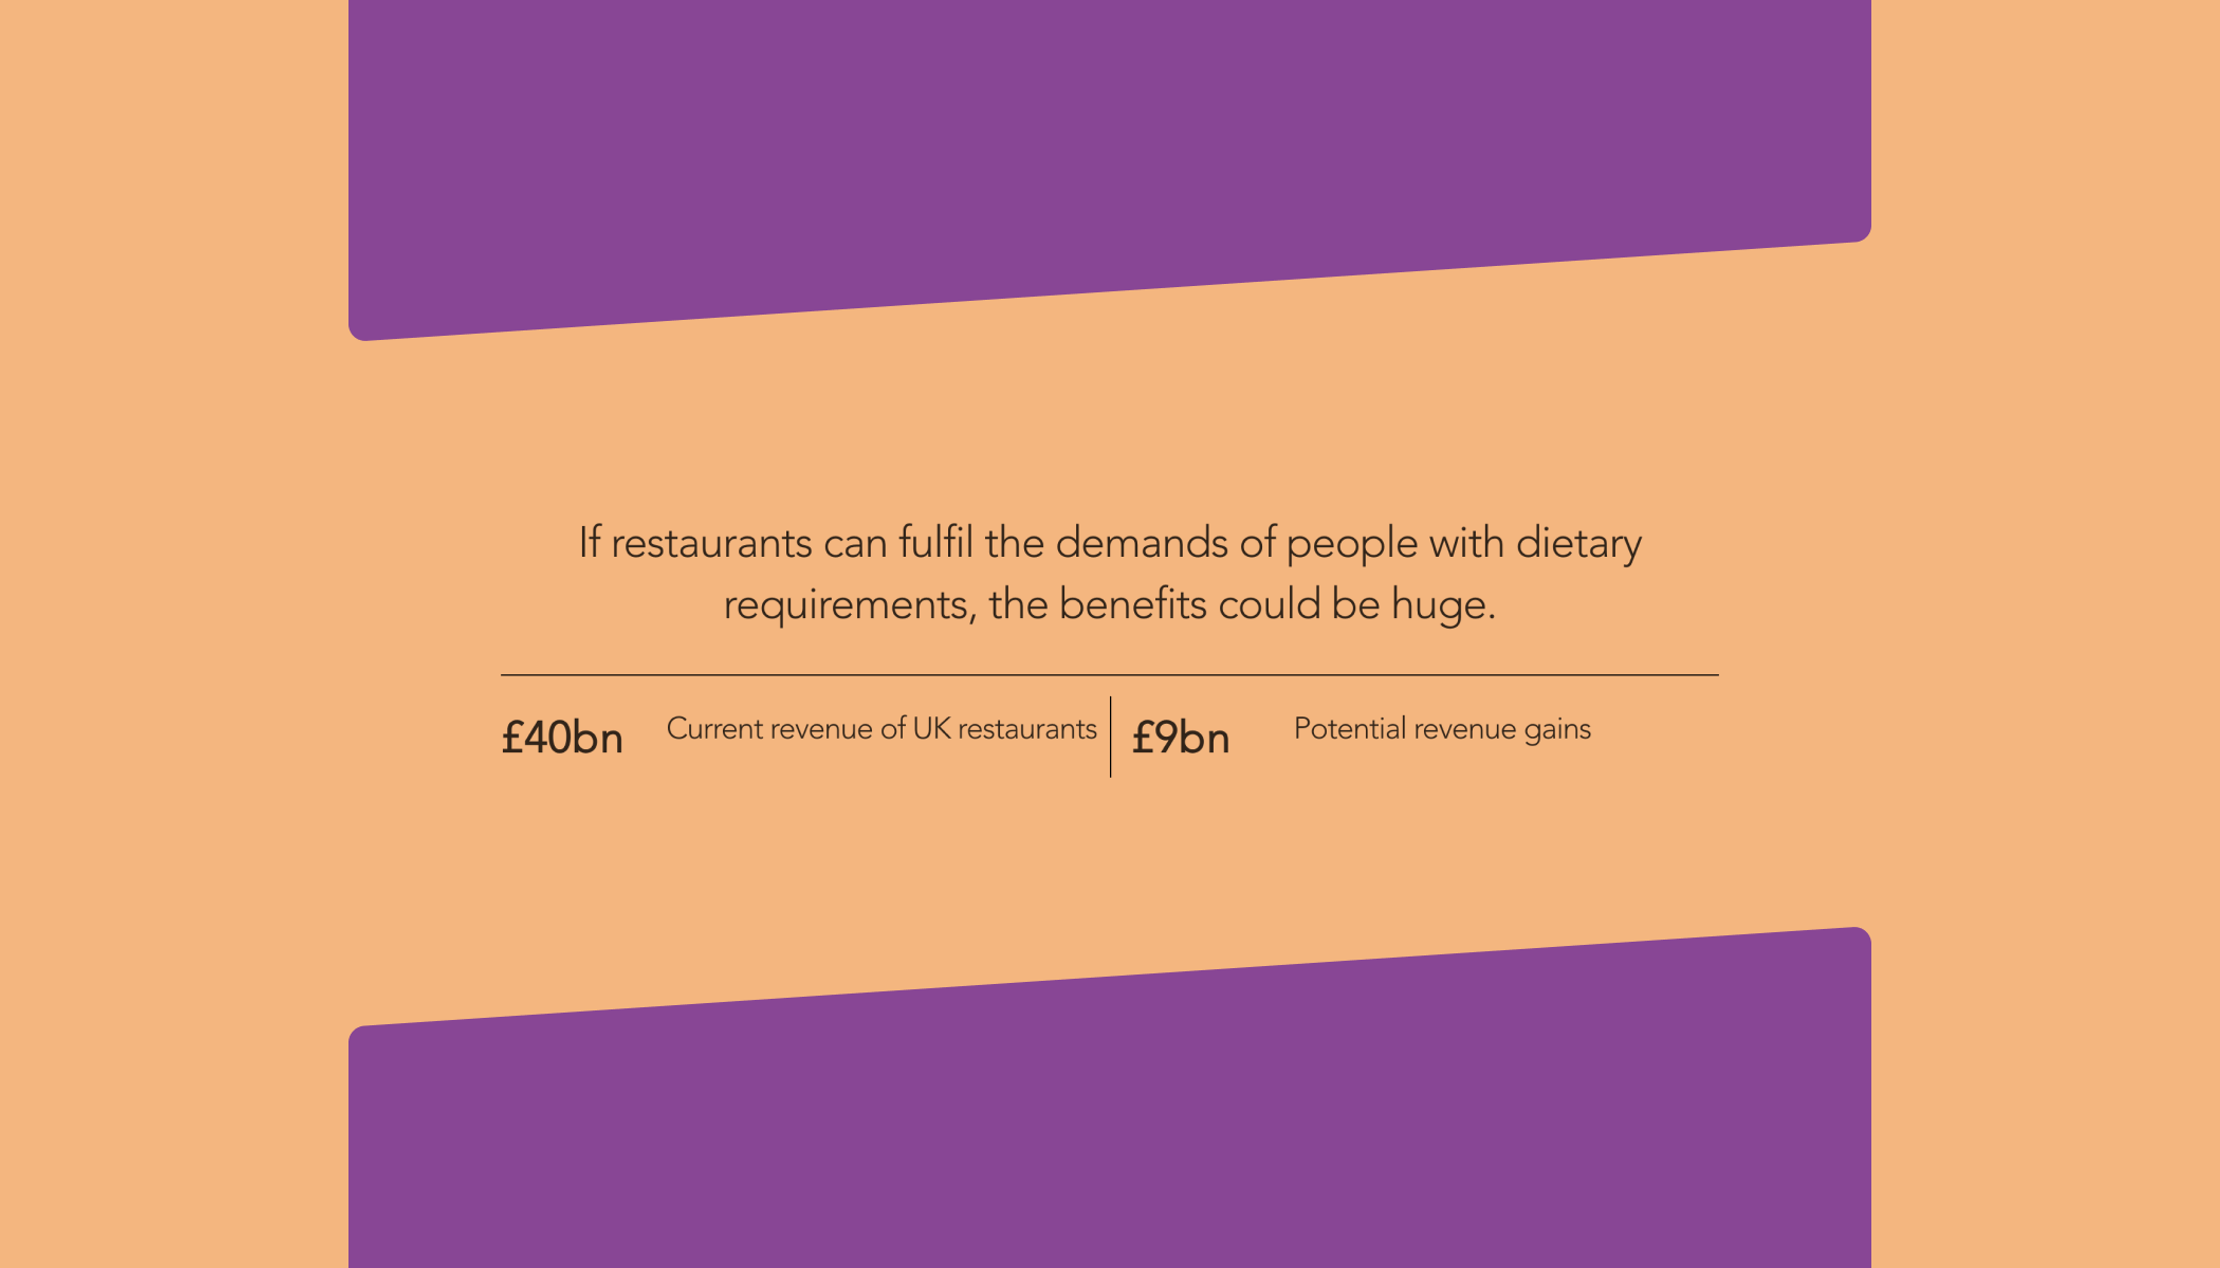 Text explaining the potential revenue to be gained if UK restaurants would fulfil the demands of people with dietary requirements. It shows the current revenue of UK restaurants is £40 billion and that a further £9 billion could be added if dietary requirements are fulfilled in restaurants.